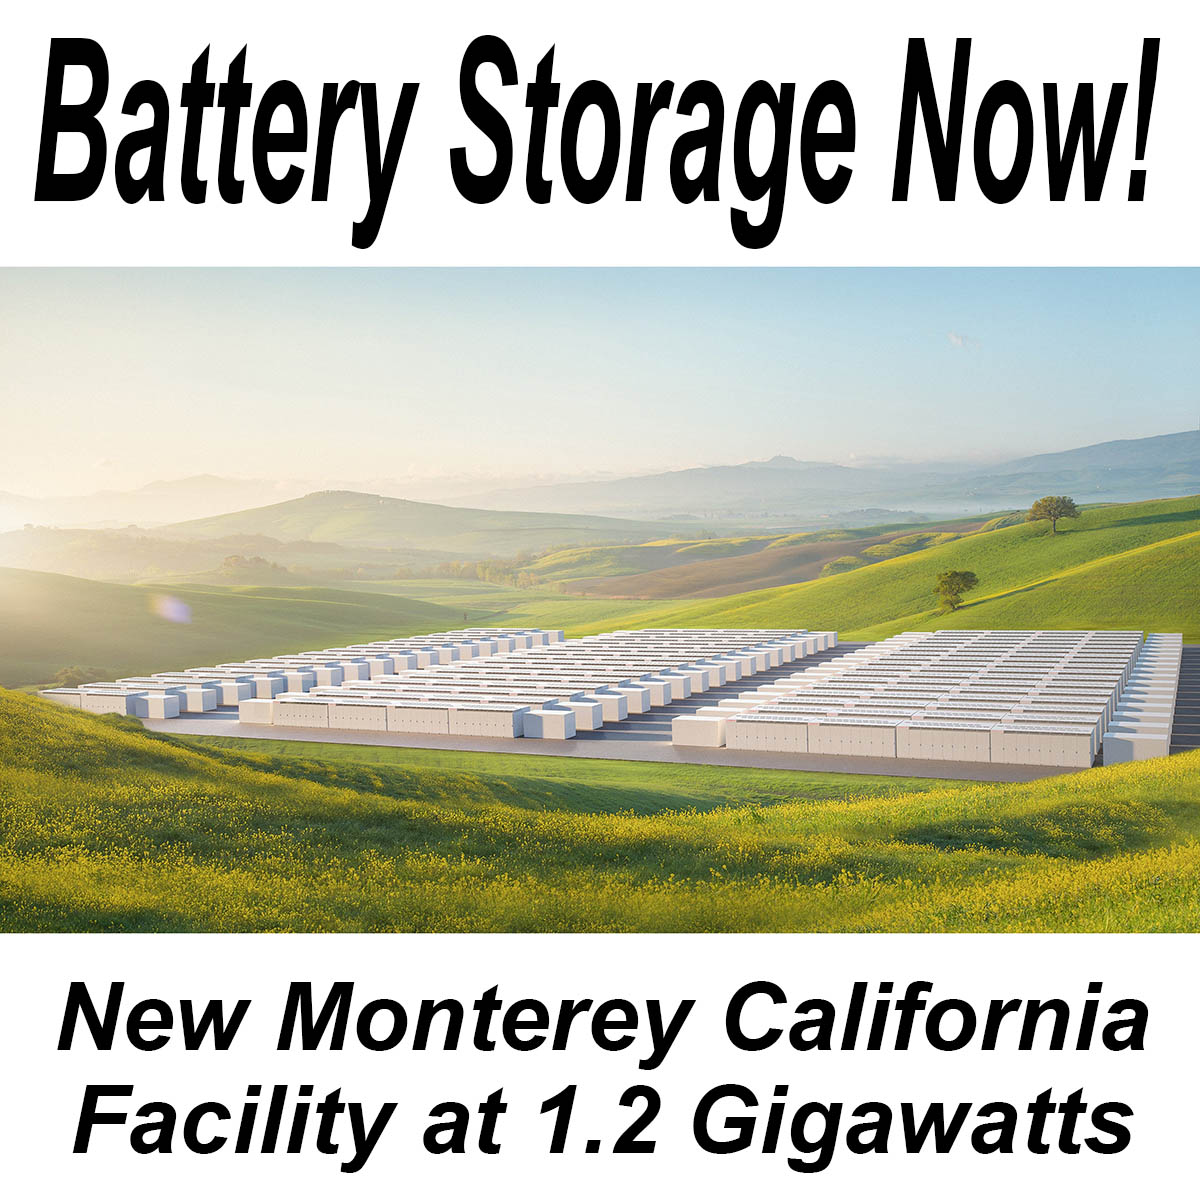 Battery Storage is Here: New Monterey California Facility at 1.2 Gigawatts